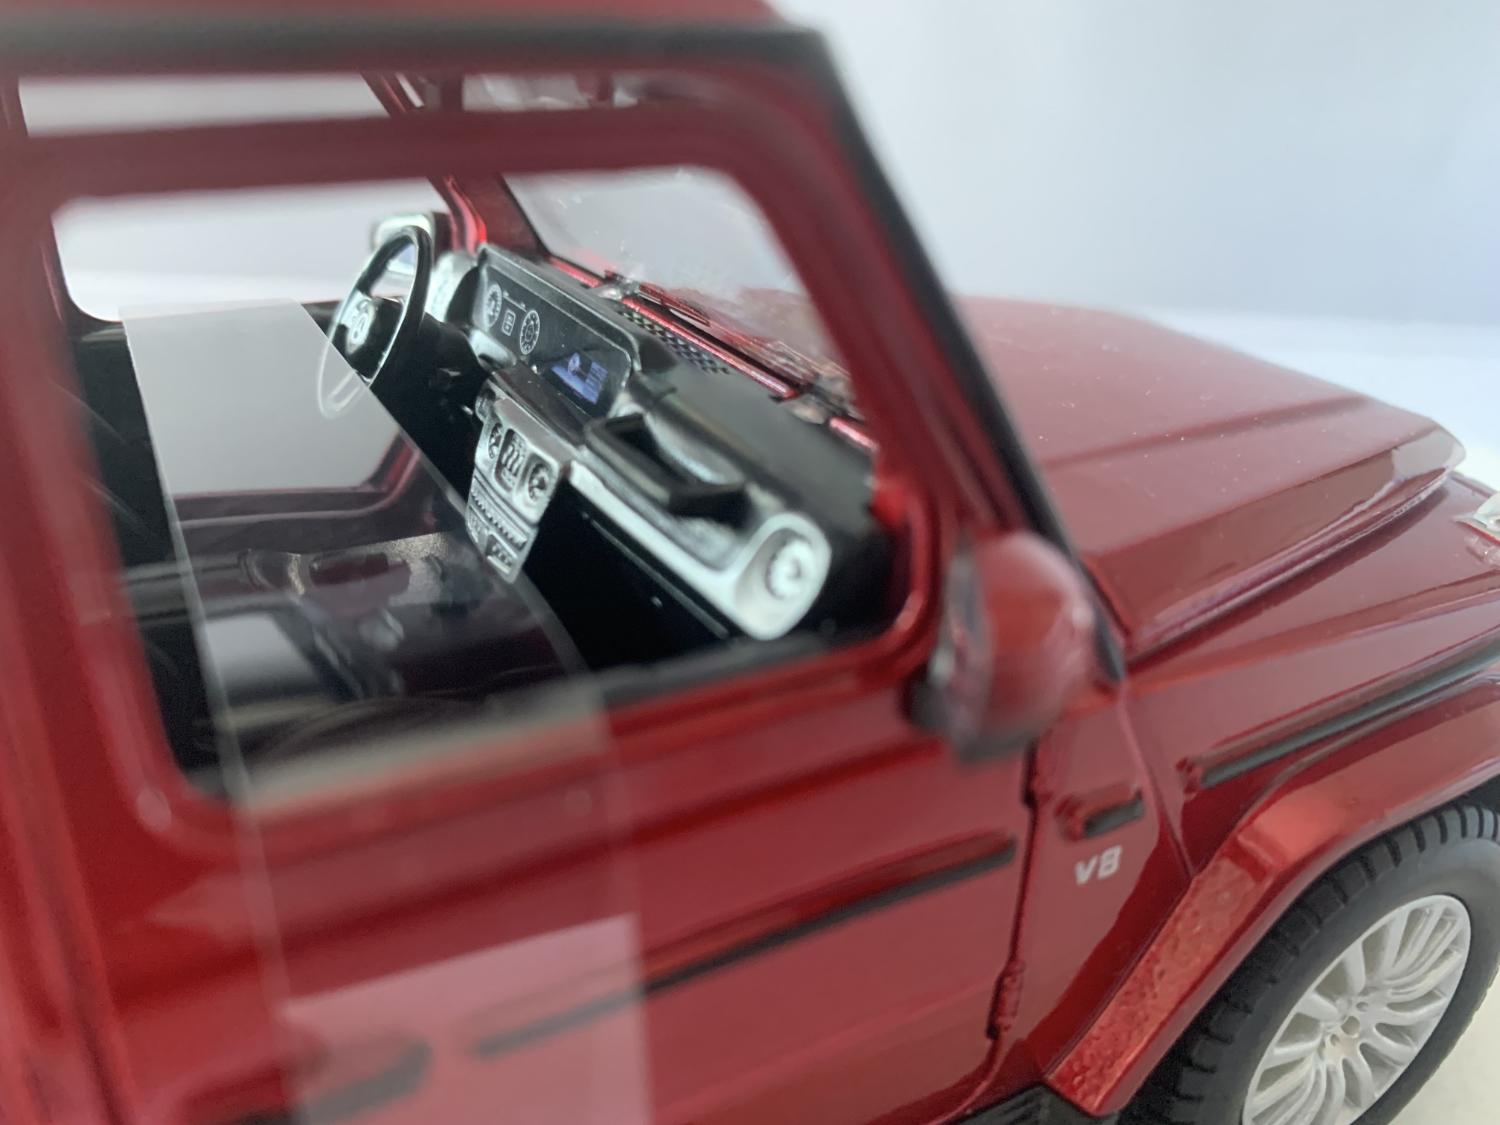 An excellent scale model of a Mercedes Benz G Class decorated in metallic red with sunroof and silver wheels.  Other trims are finished in chrome, black and silv